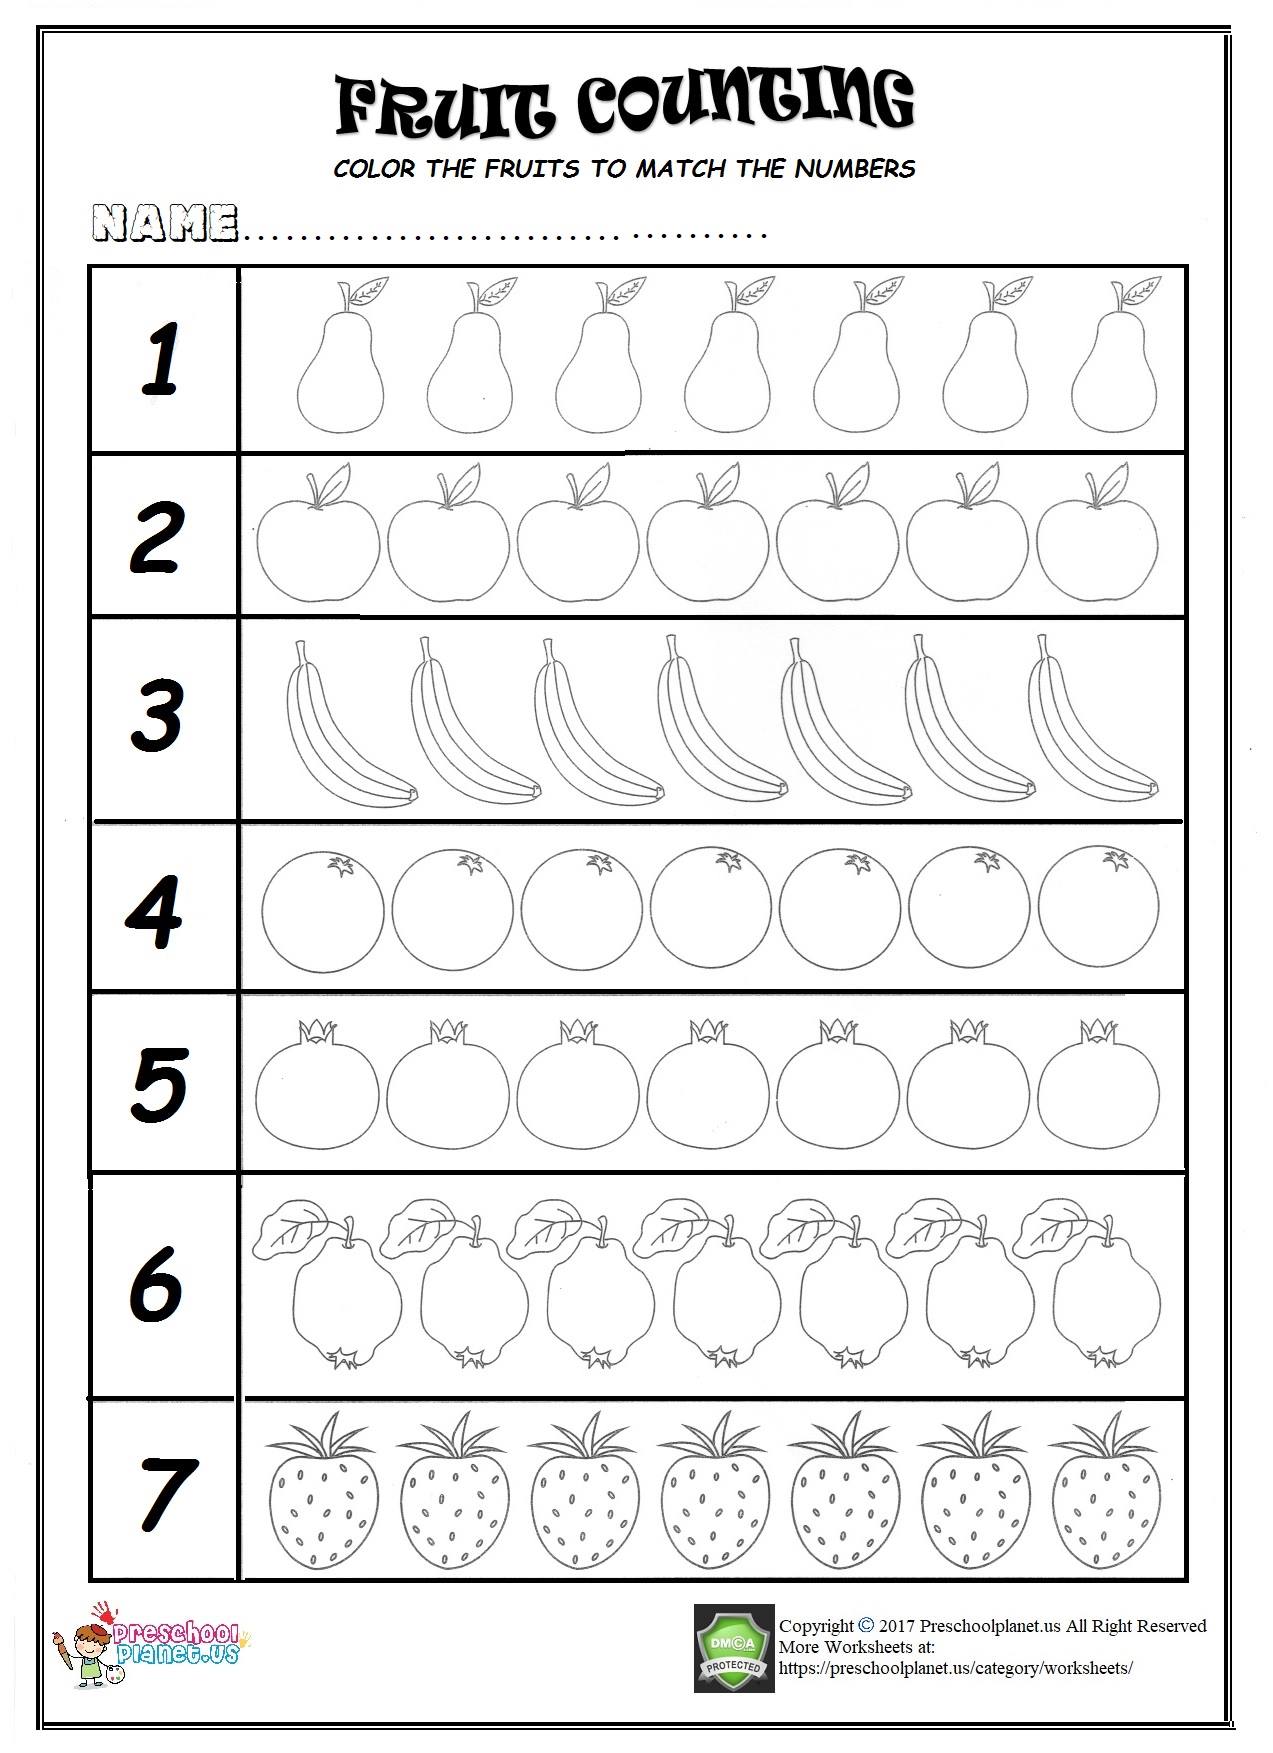 Fruits число. Fruits counting Worksheets. Fruits Worksheets for Kindergarten. Count Fruits Worksheets. Count Fruit Worksheets for Kids.